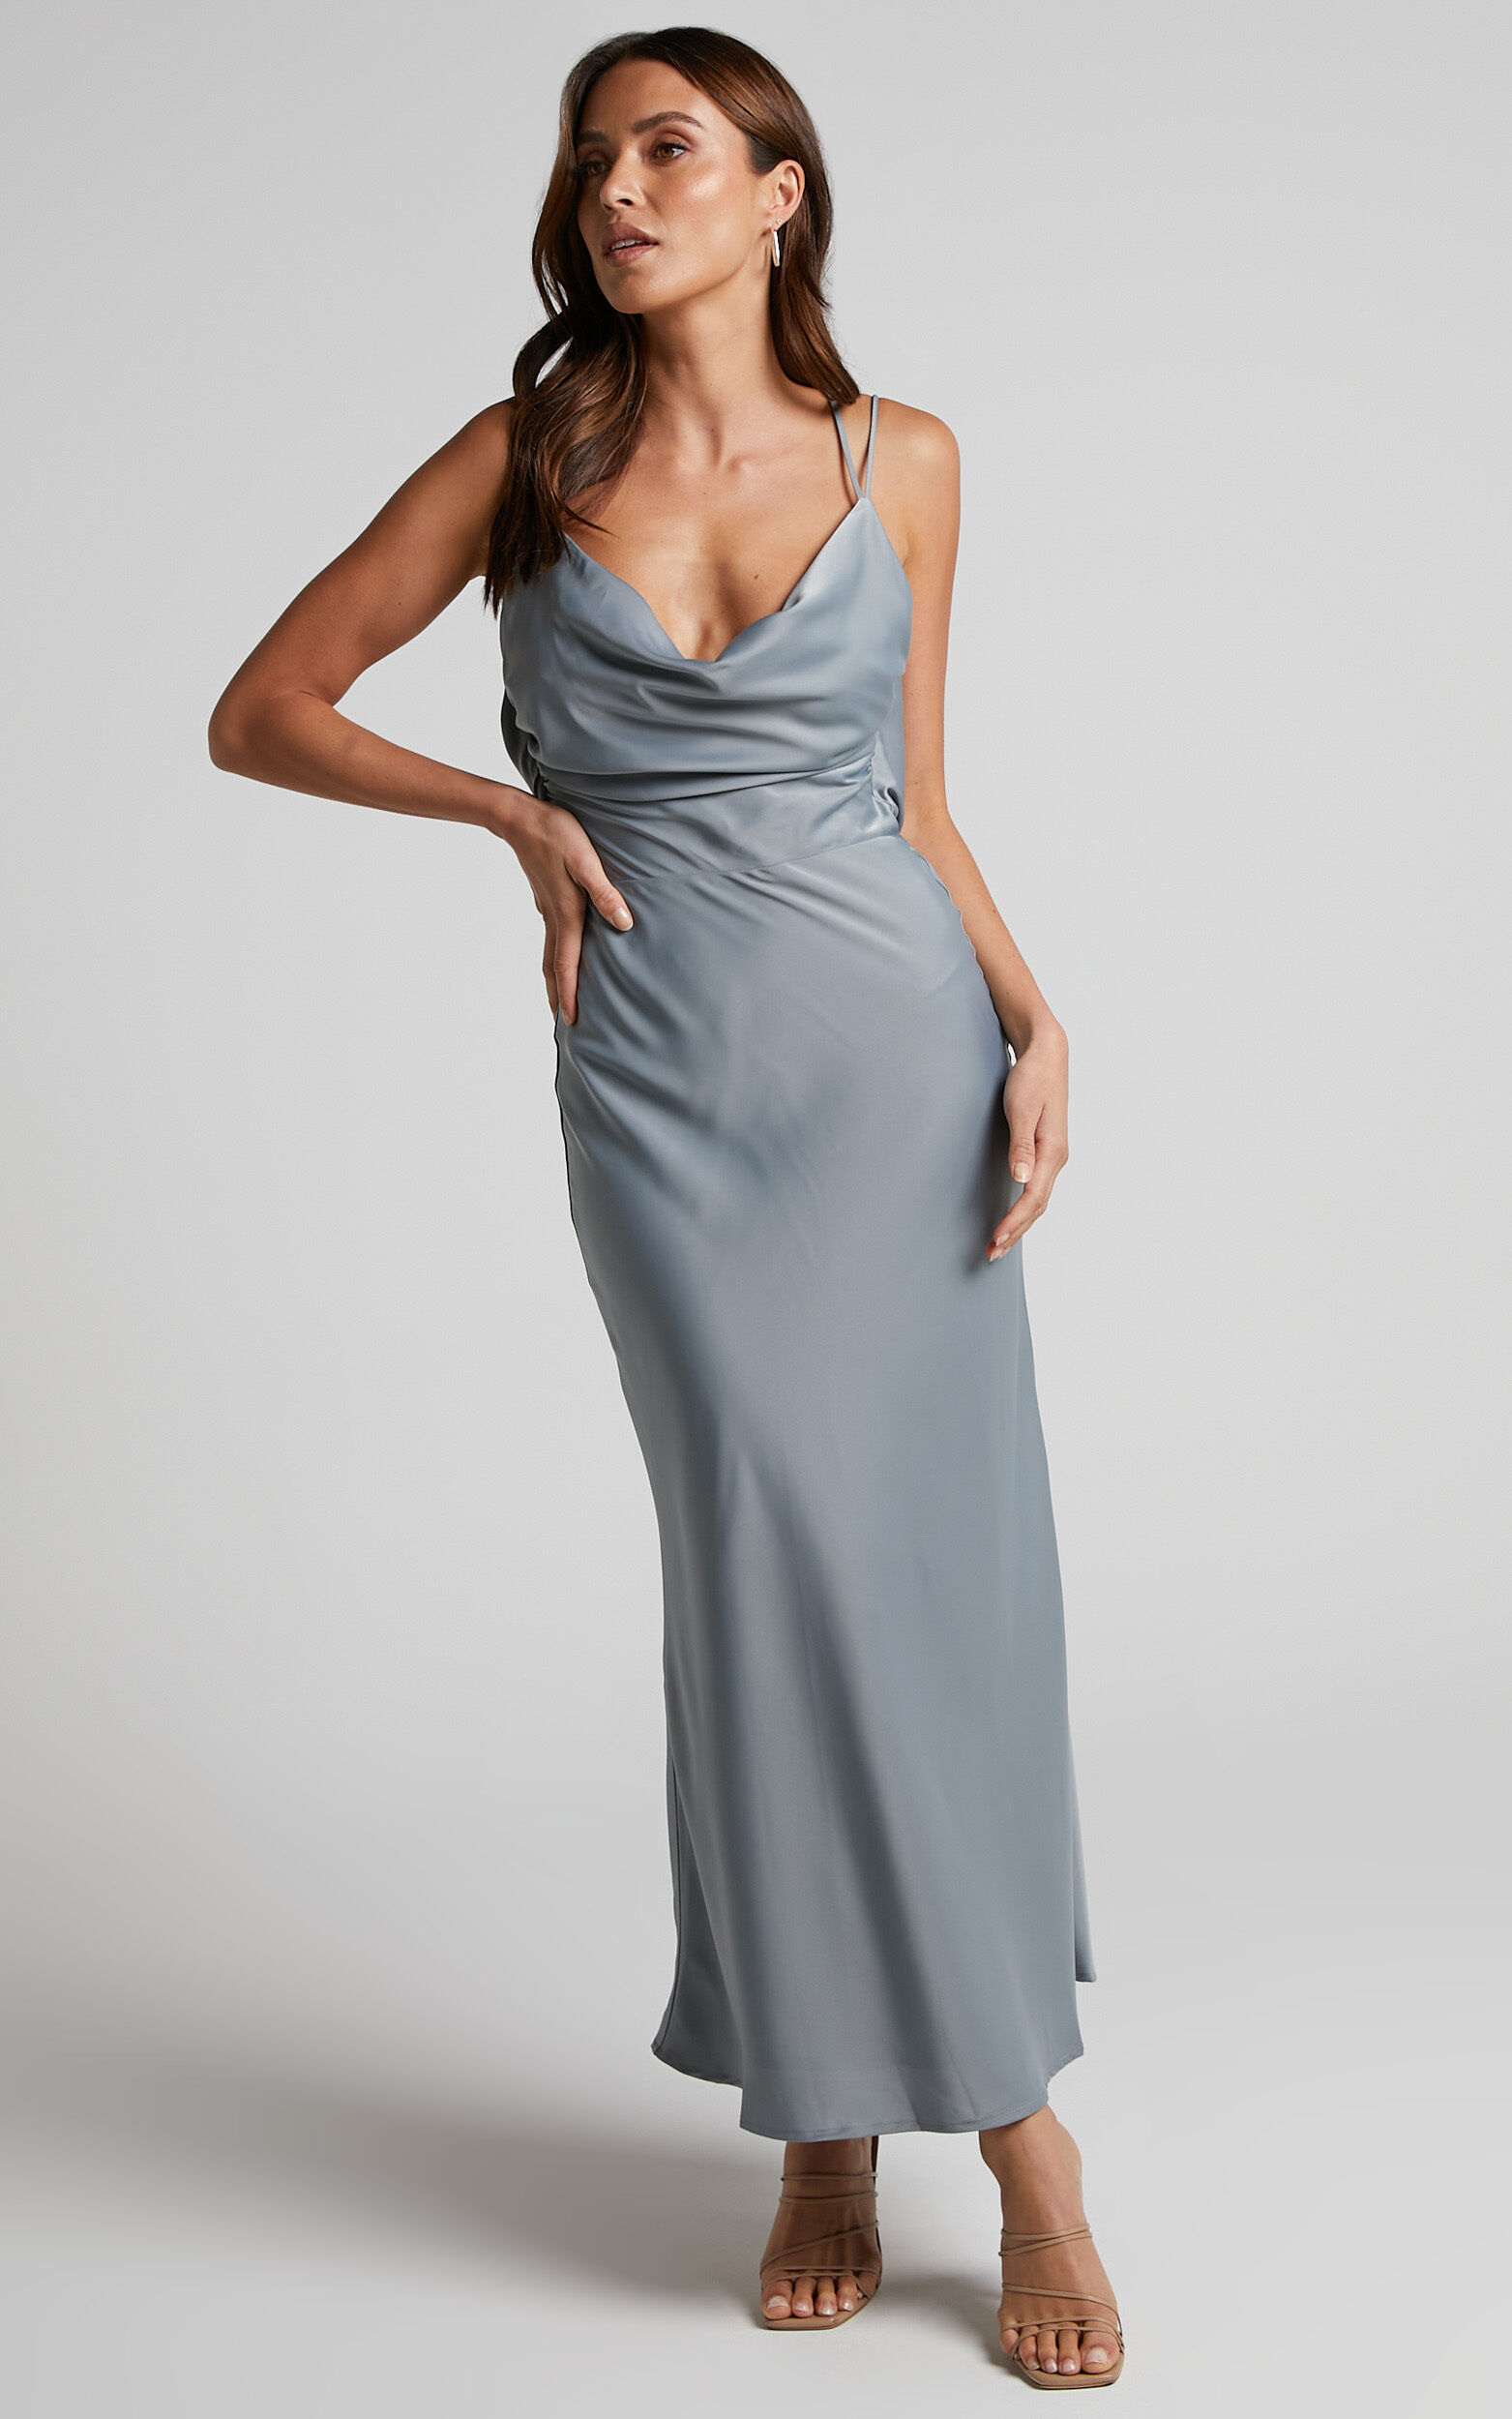 Soft Petal Midi Dress - Cowl Crossover Back Dress in Pewter - 04, GRY1